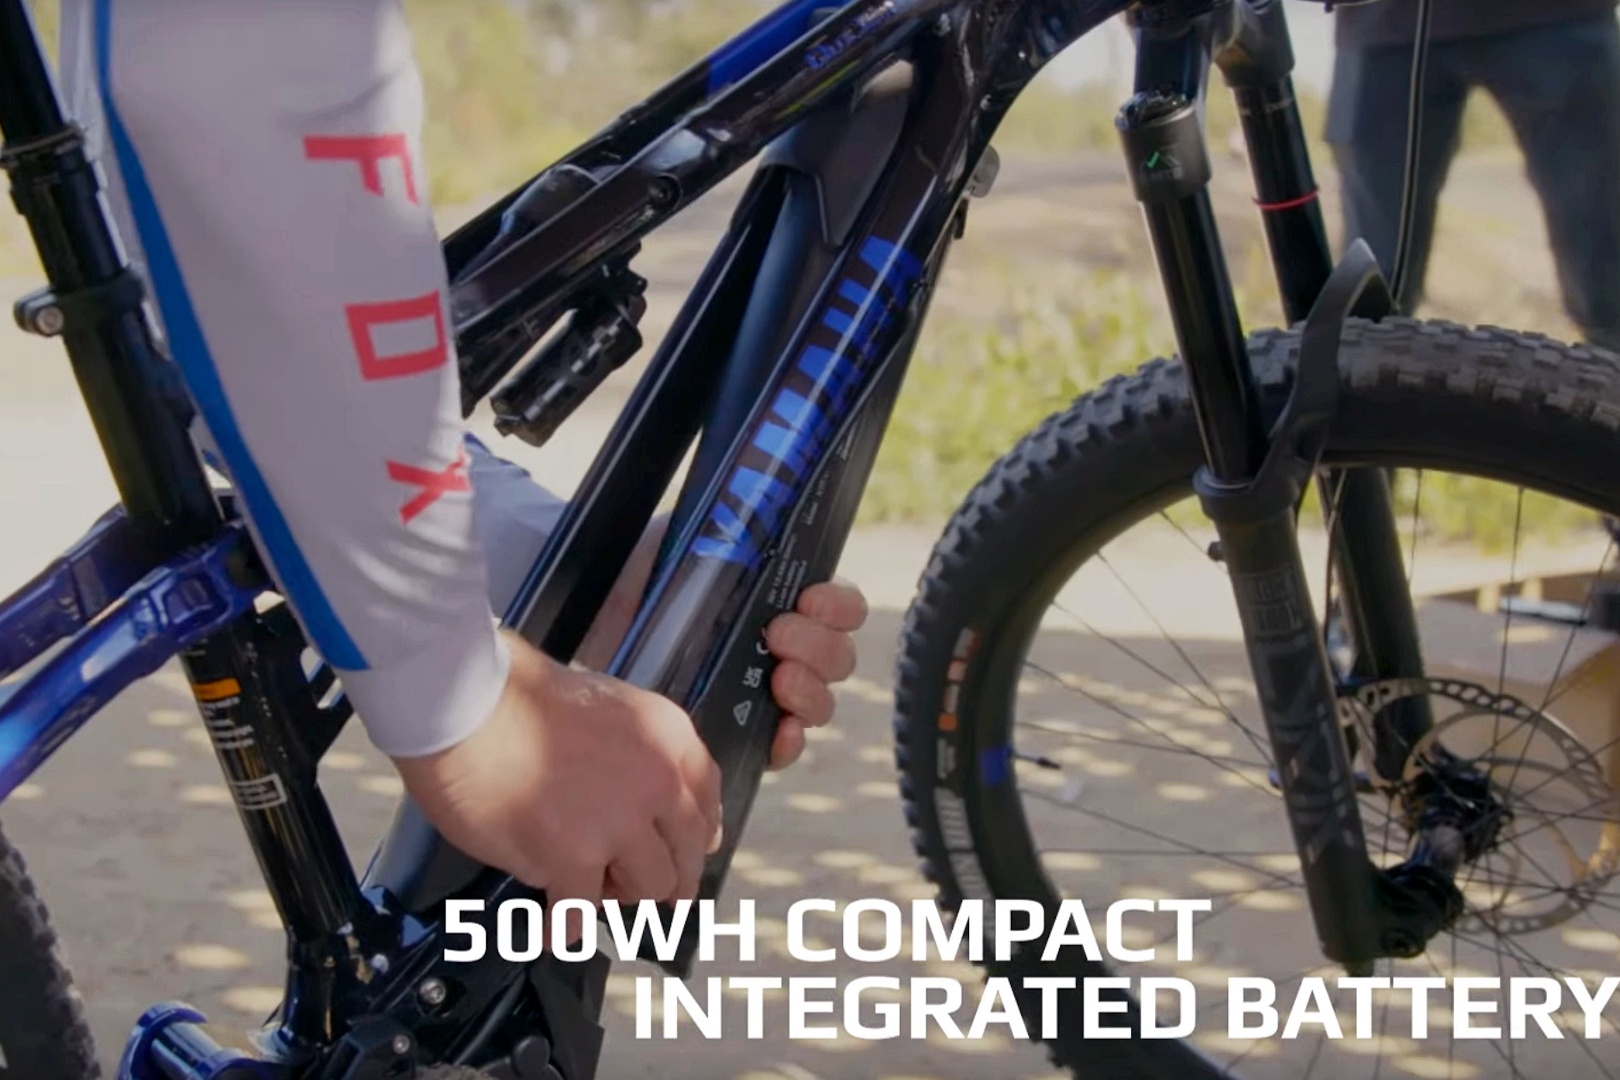 The 500 Wh battery appears to be hidden in the frame...